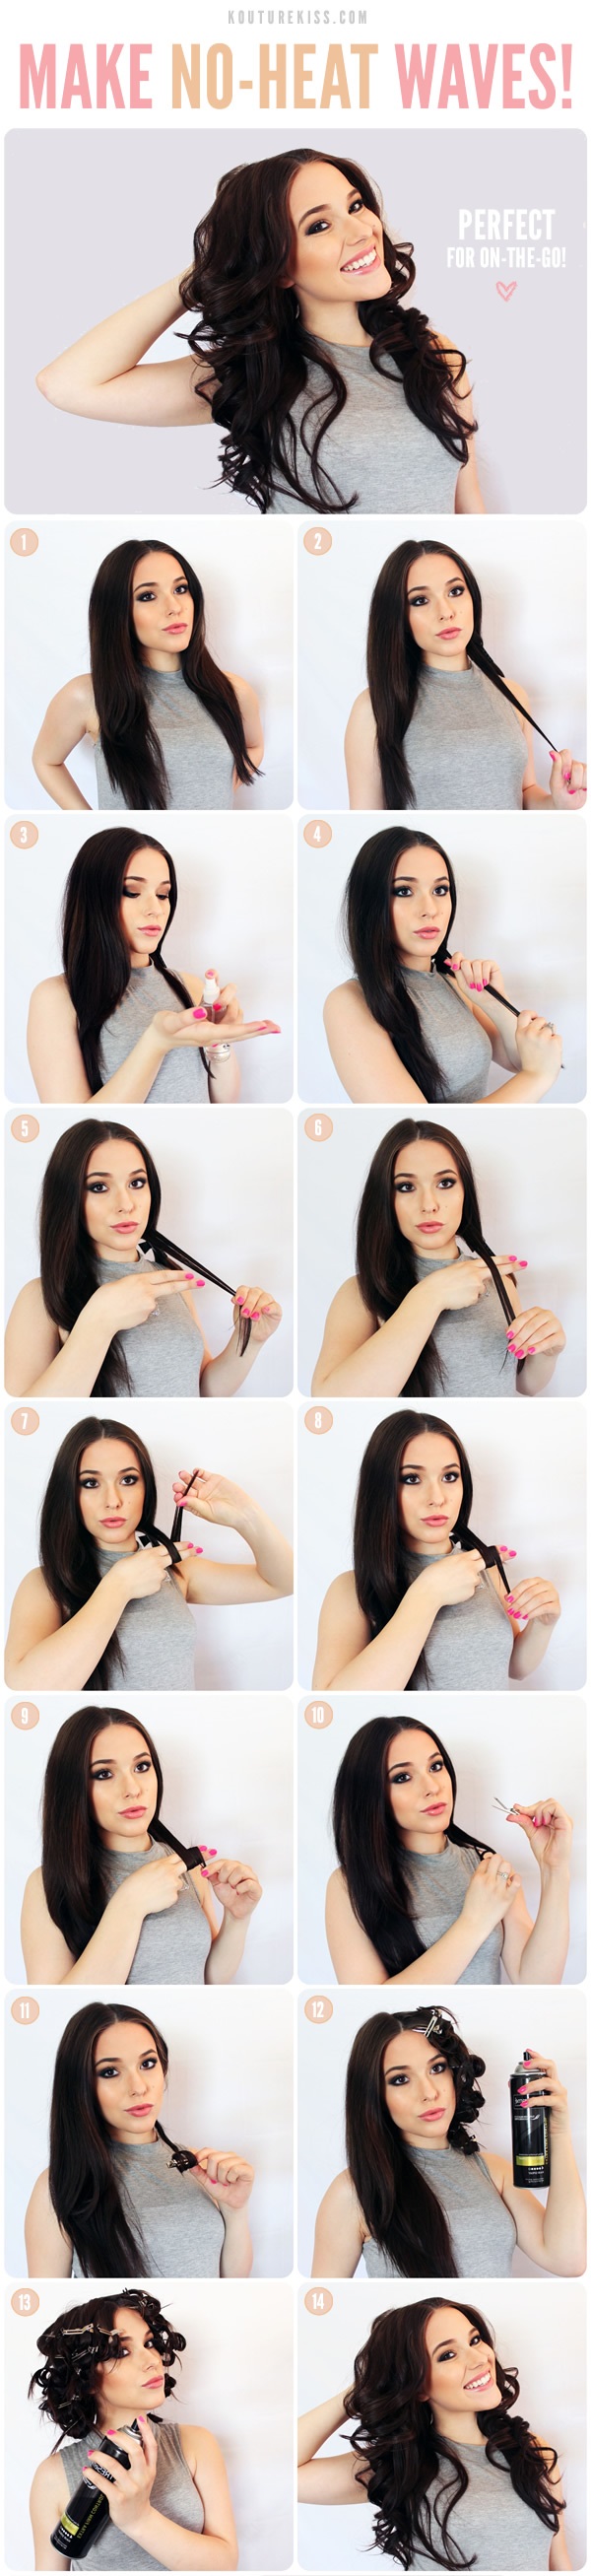 How to Make Hair Waves Without Heat Damaging - AllDayChic